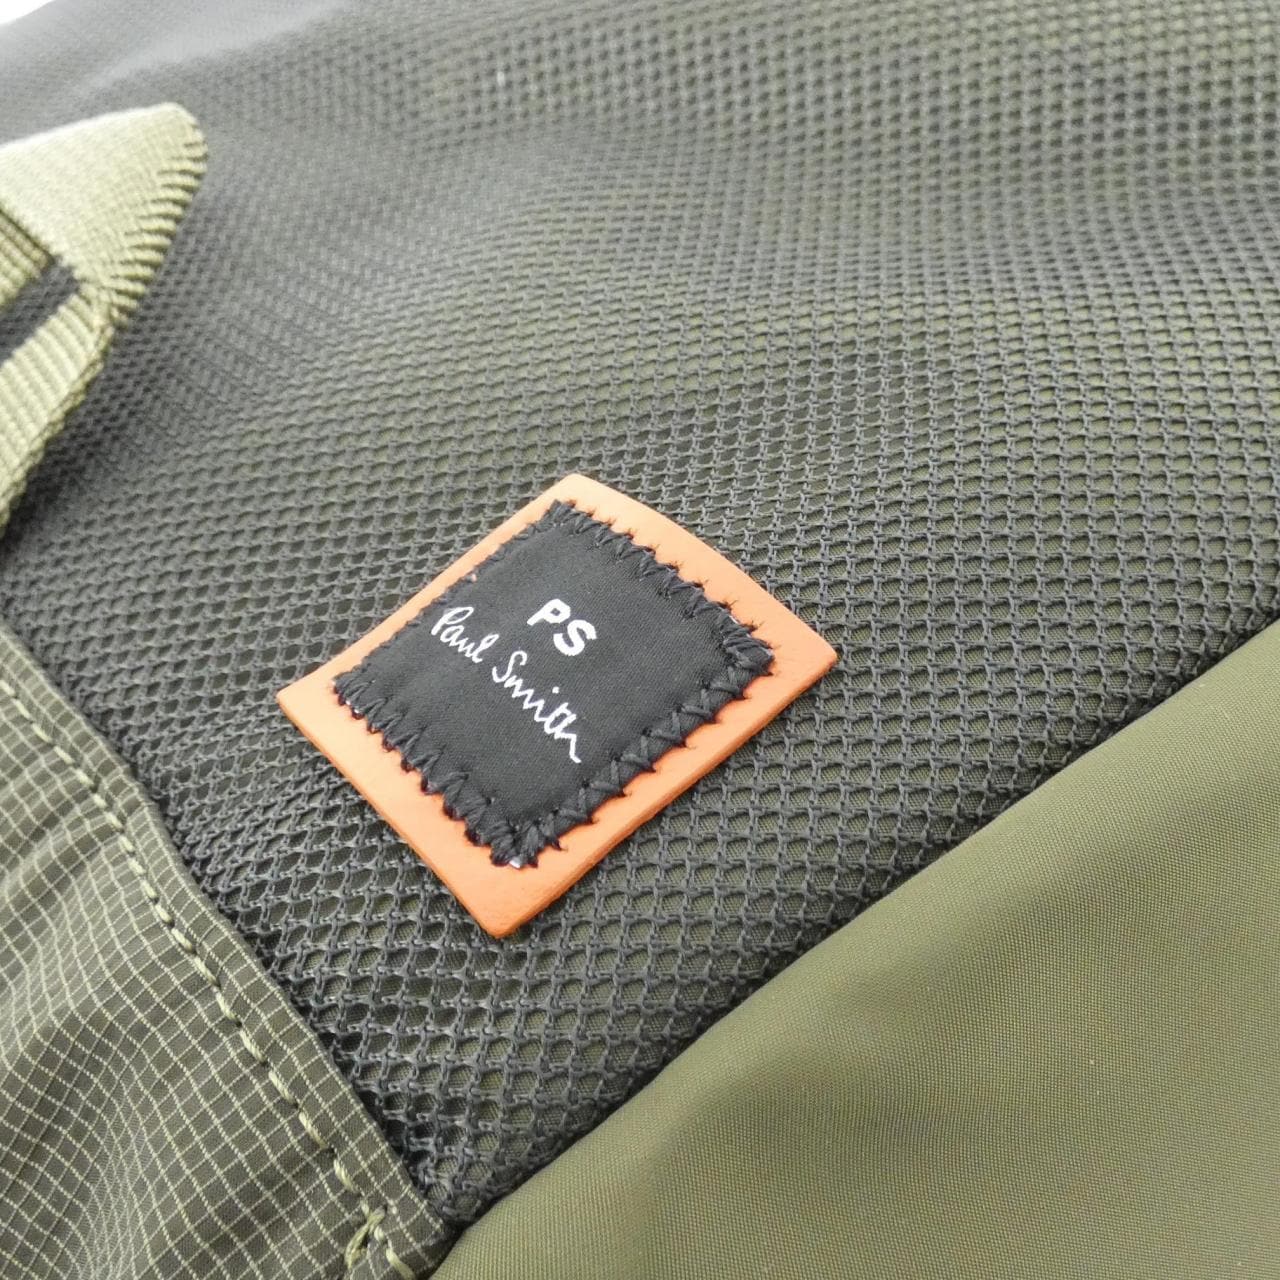 [BRAND NEW] Paul Smith 7458 Backpack